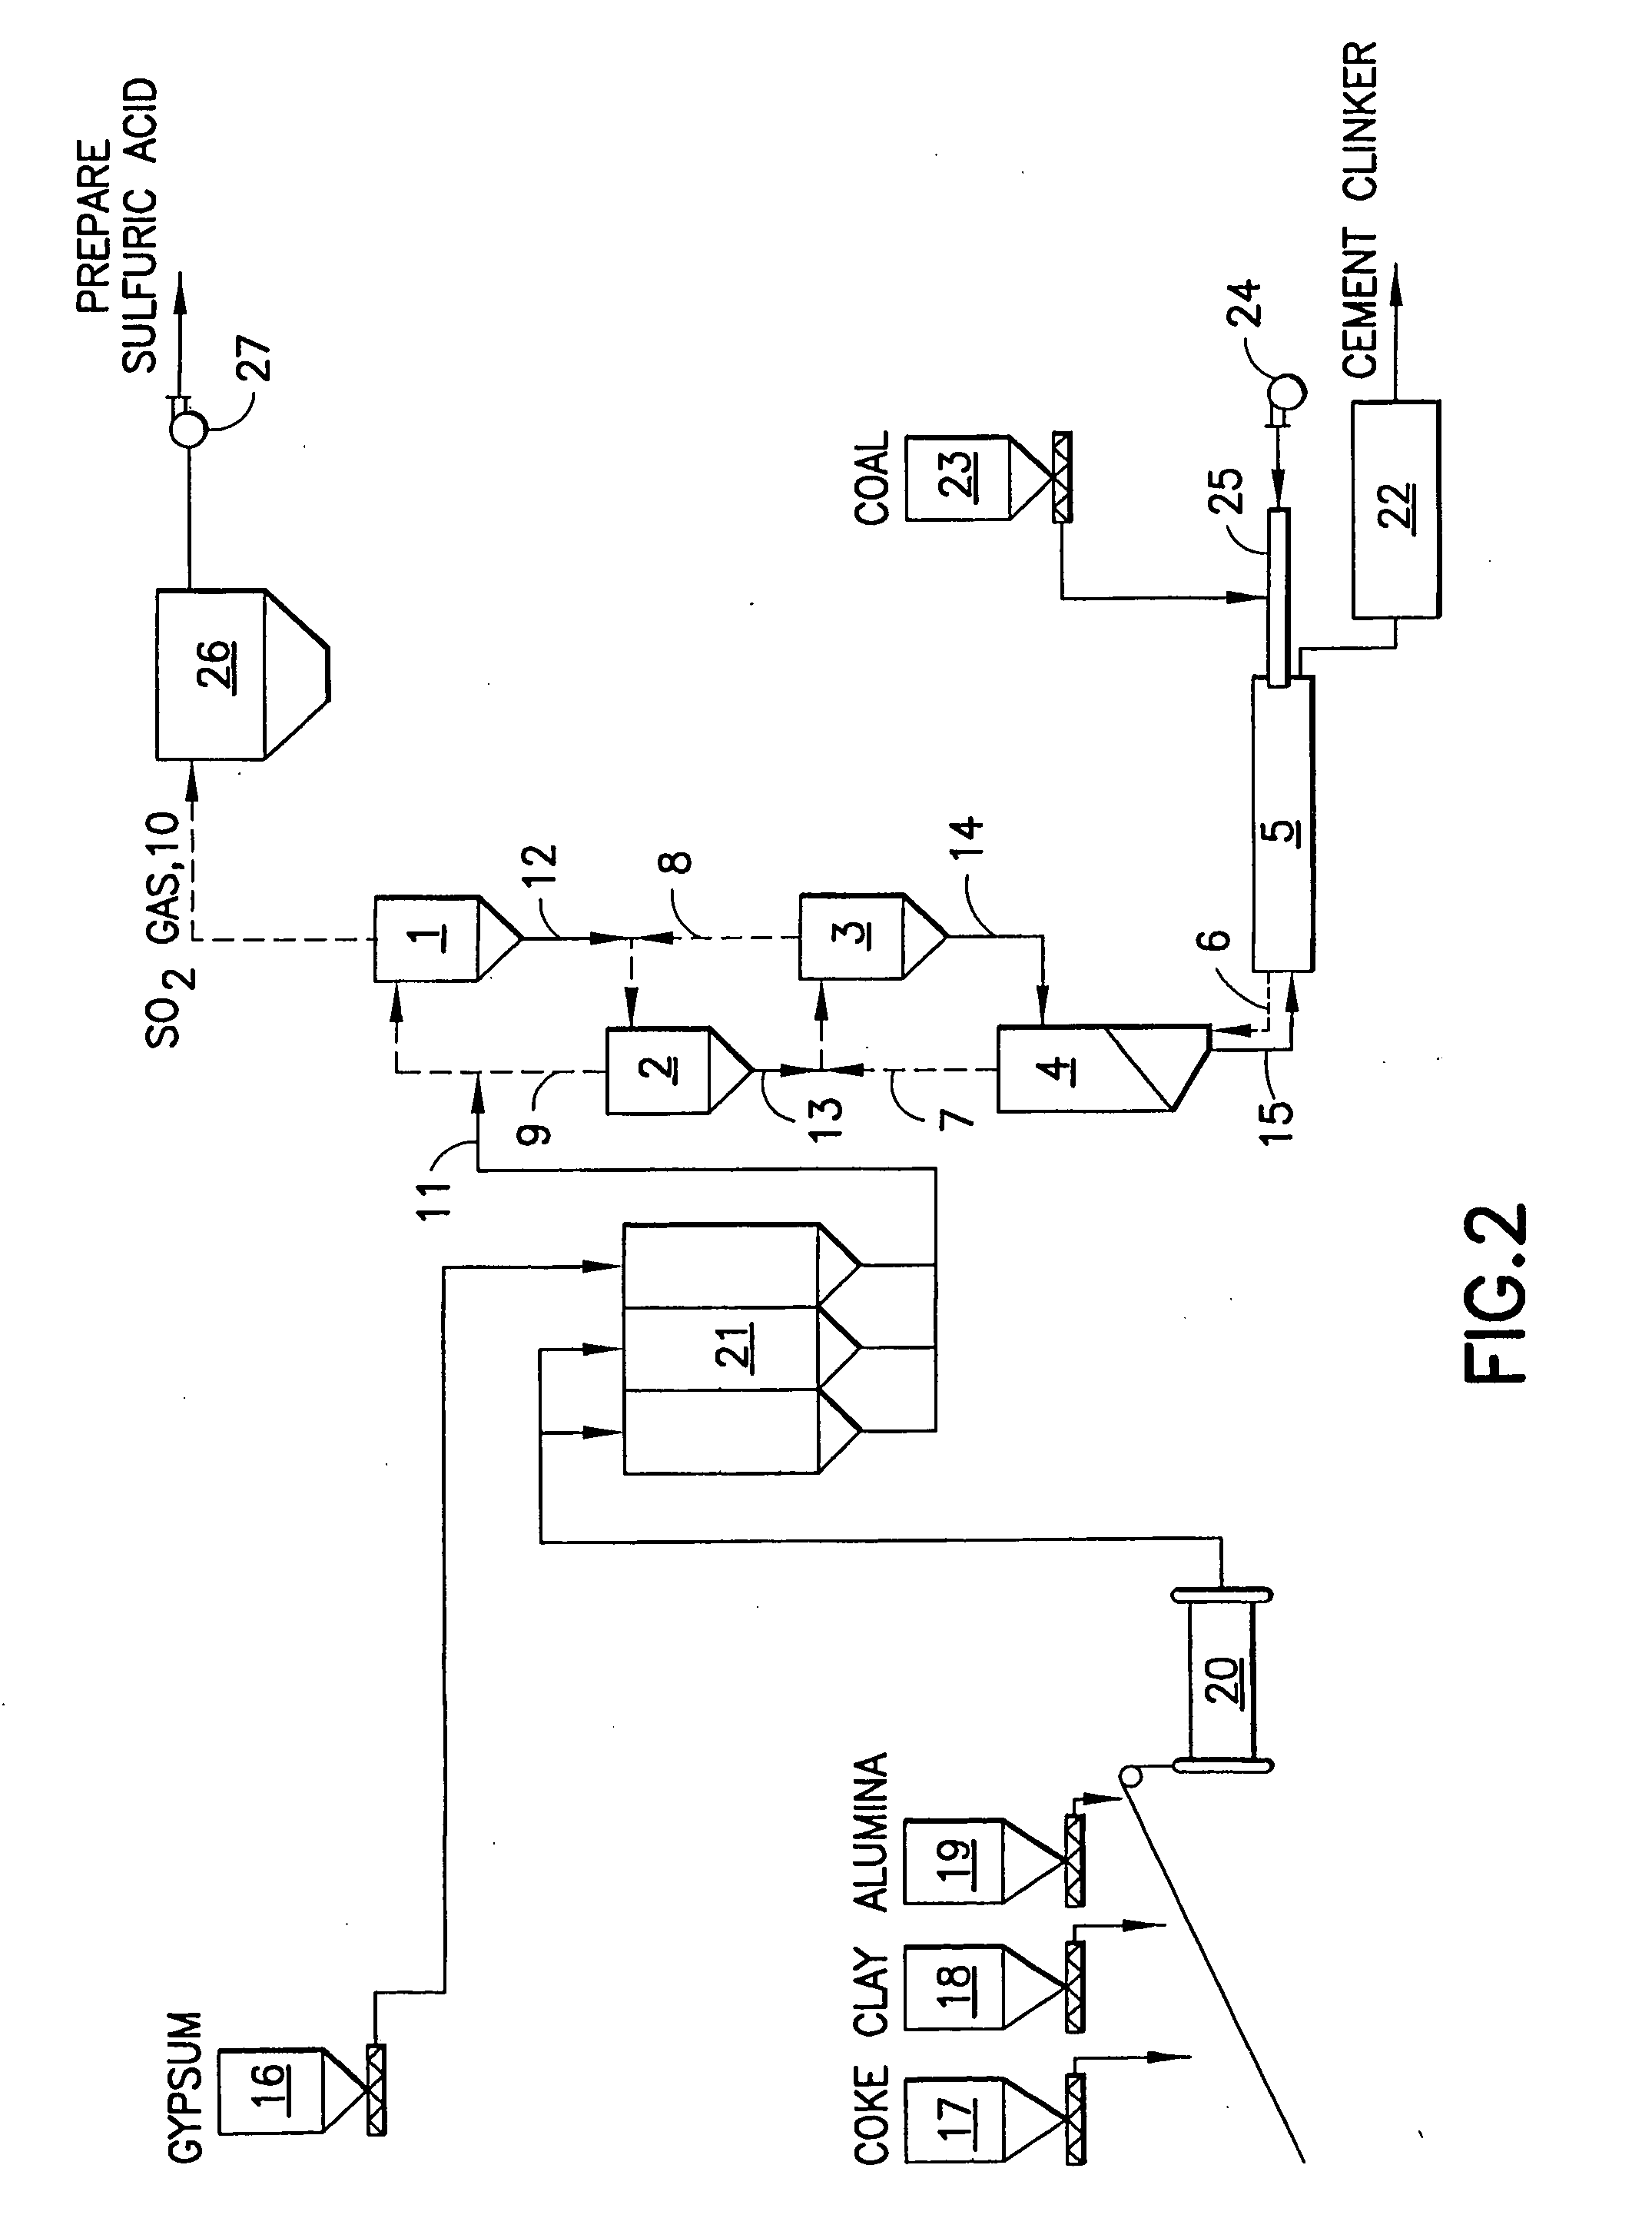 Method of decomposing gypsum to sulfur dioxide and the apparatus thereof